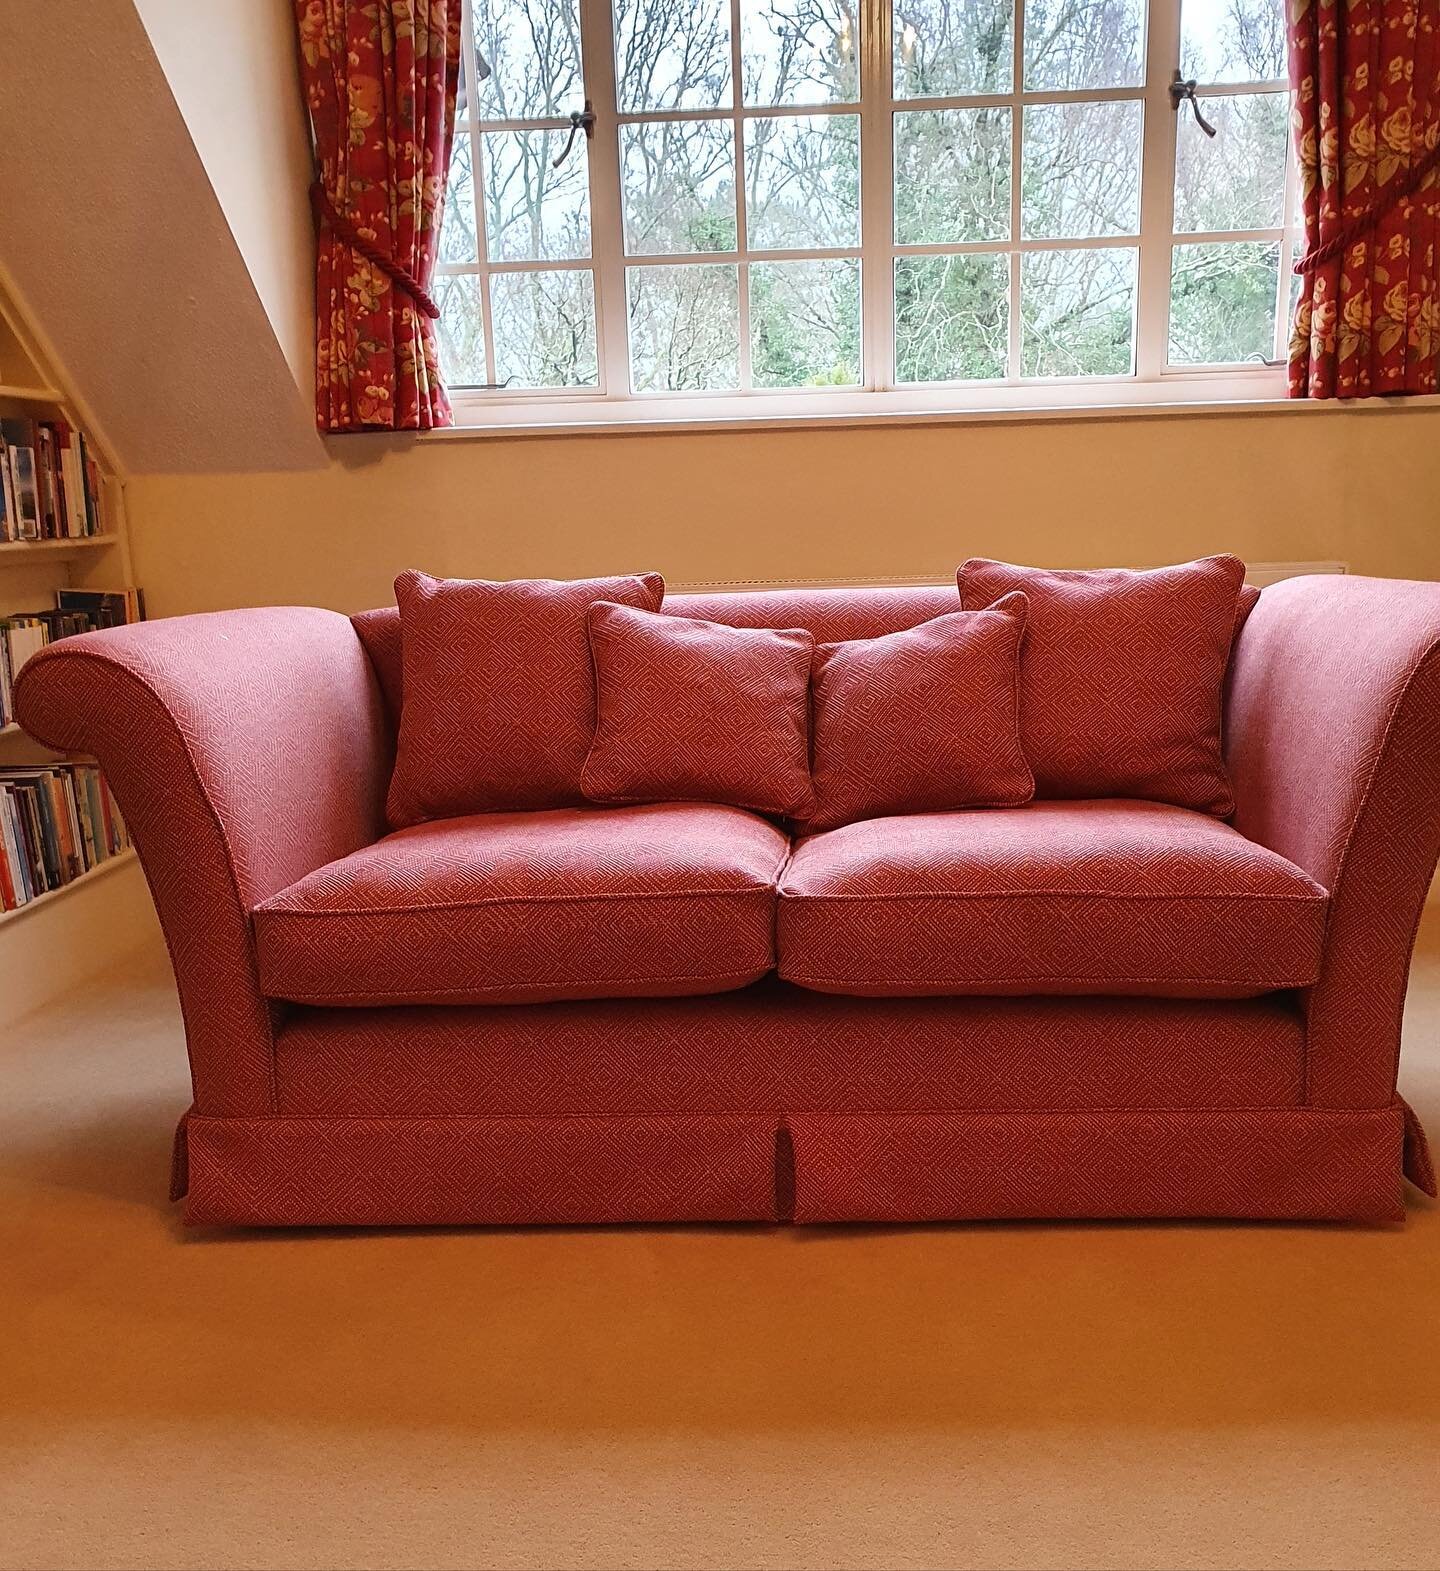 Before and after, giving the sofa a lease of life.  @linwood_fabric #linwoodfabric #re-upholstery#sofa